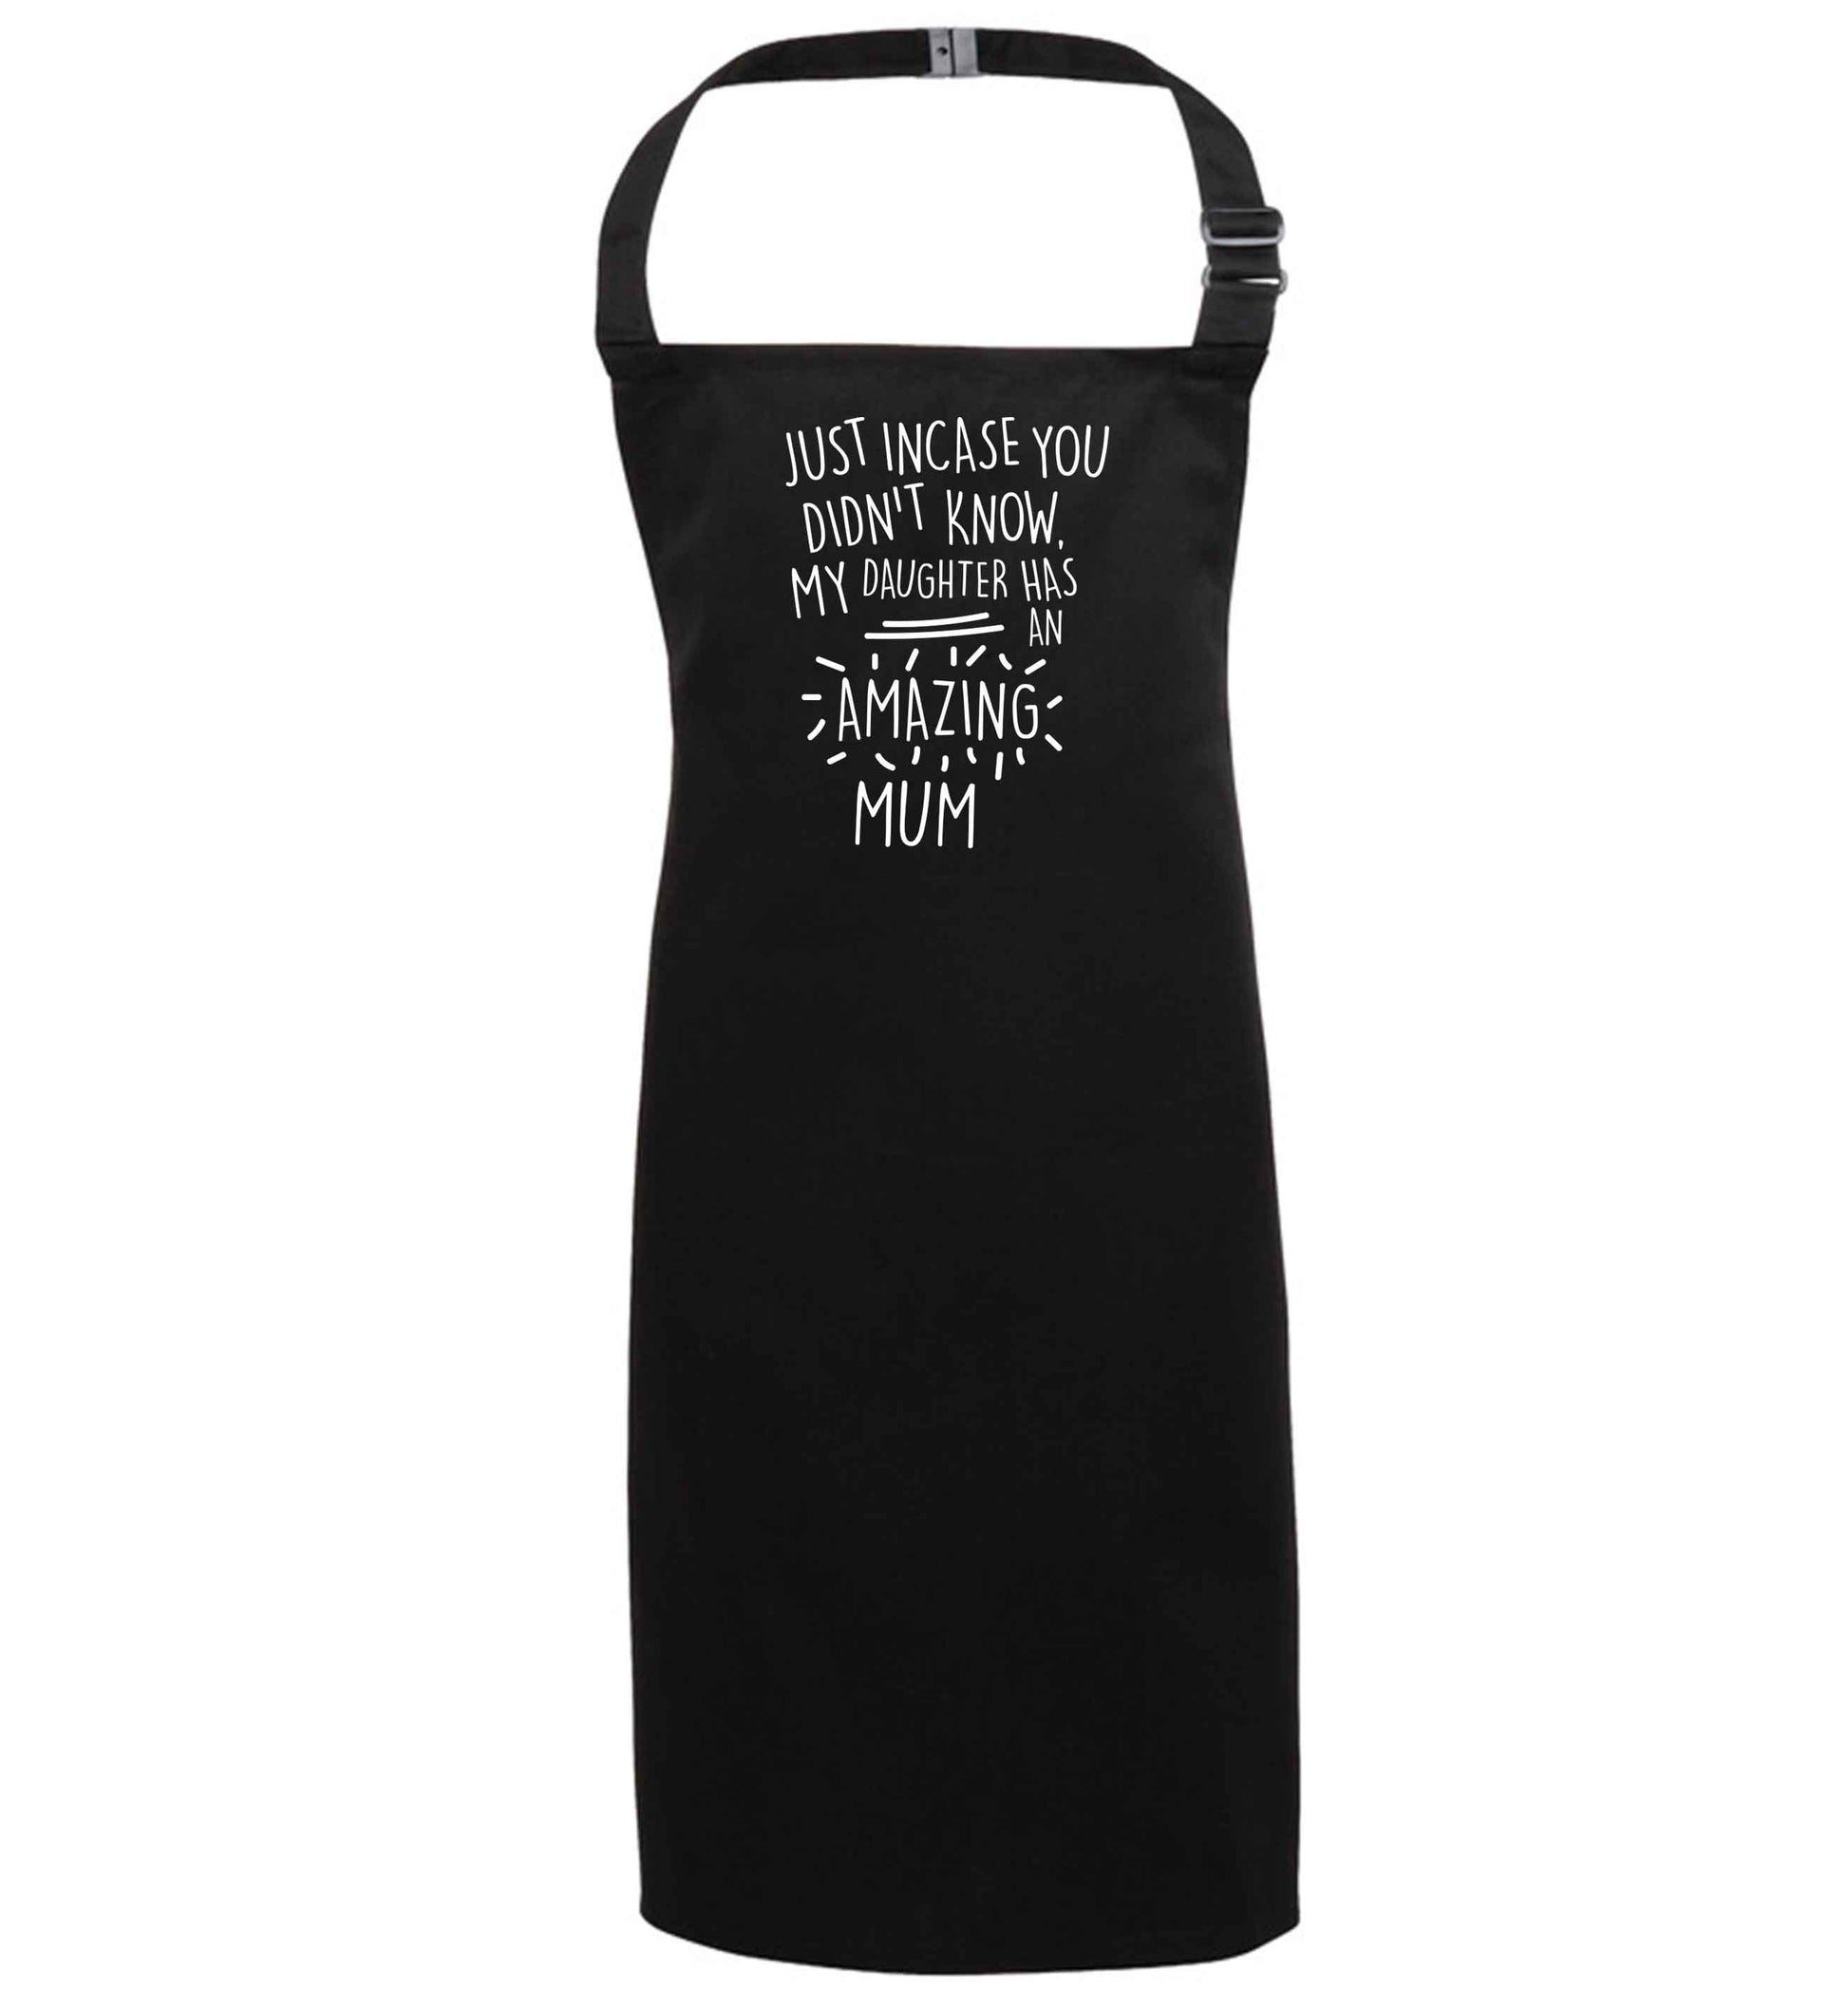 Just incase you didn't know my daughter has an amazing mum black apron 7-10 years